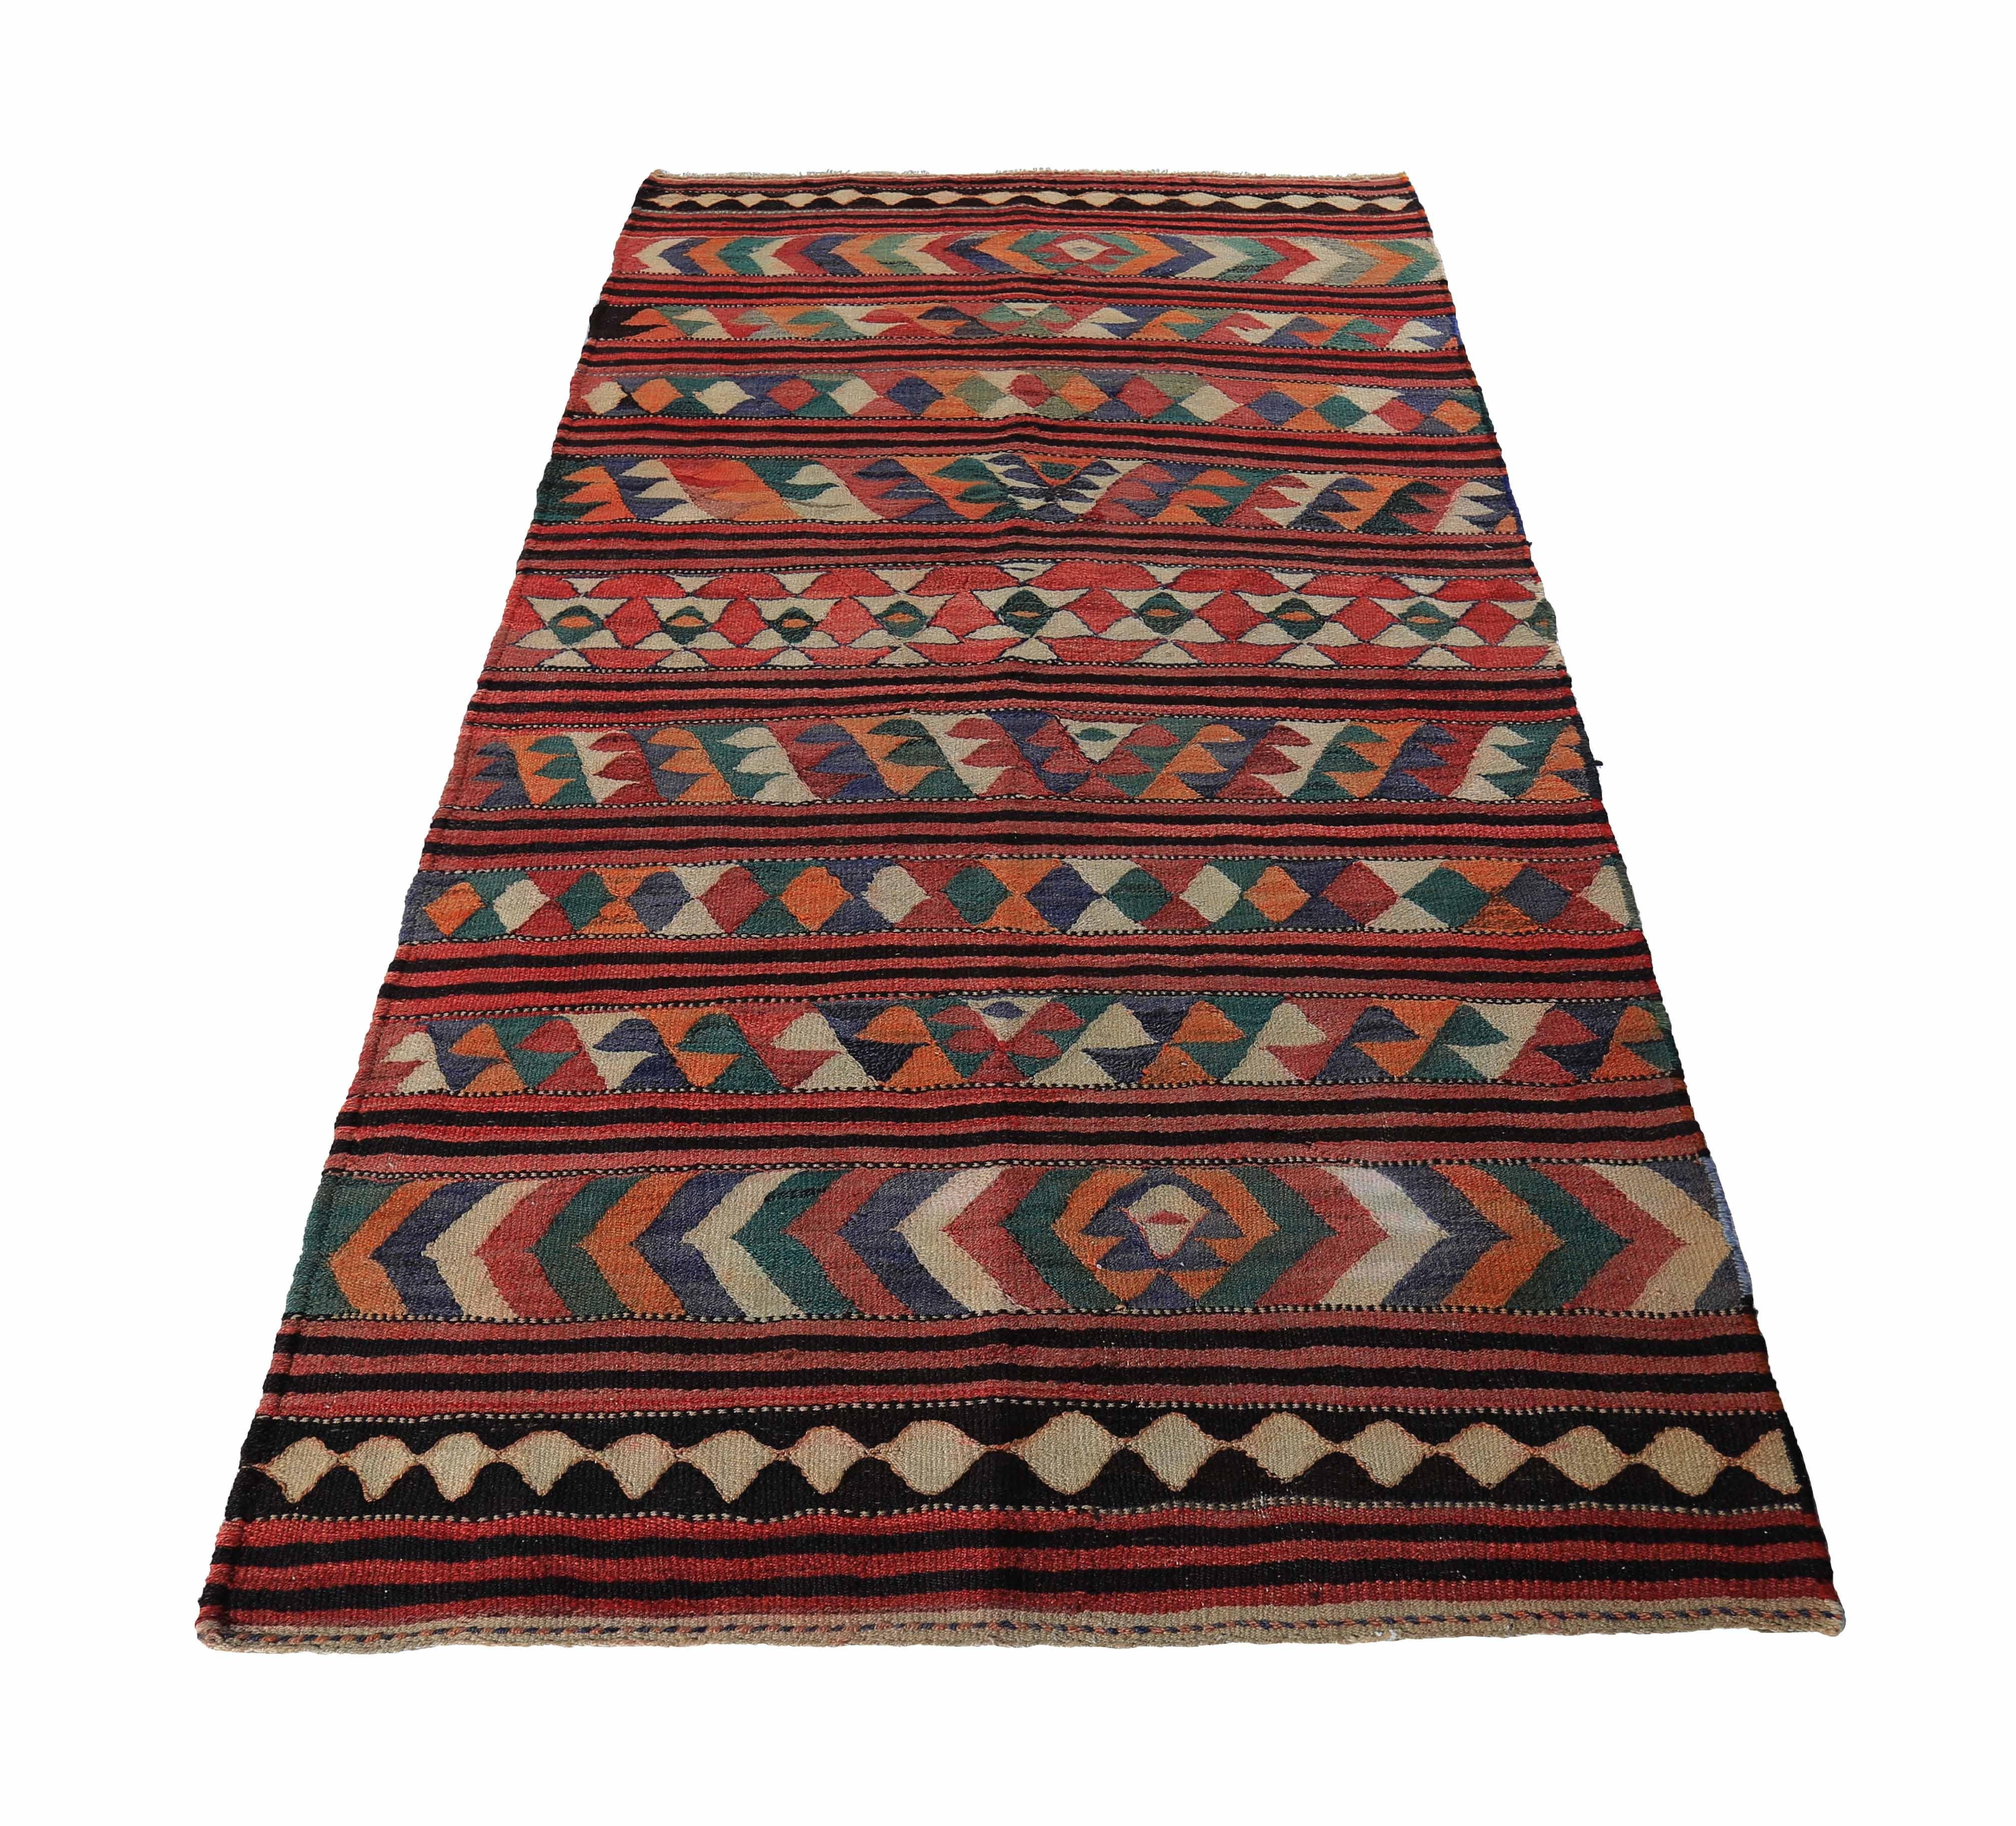 Modern Turkish rug handwoven from the finest sheep’s wool and colored with all-natural vegetable dyes that are safe for humans and pets. It’s a traditional Kilim flat-weave design featuring navy, green, and ivory geometric details on a beautiful red